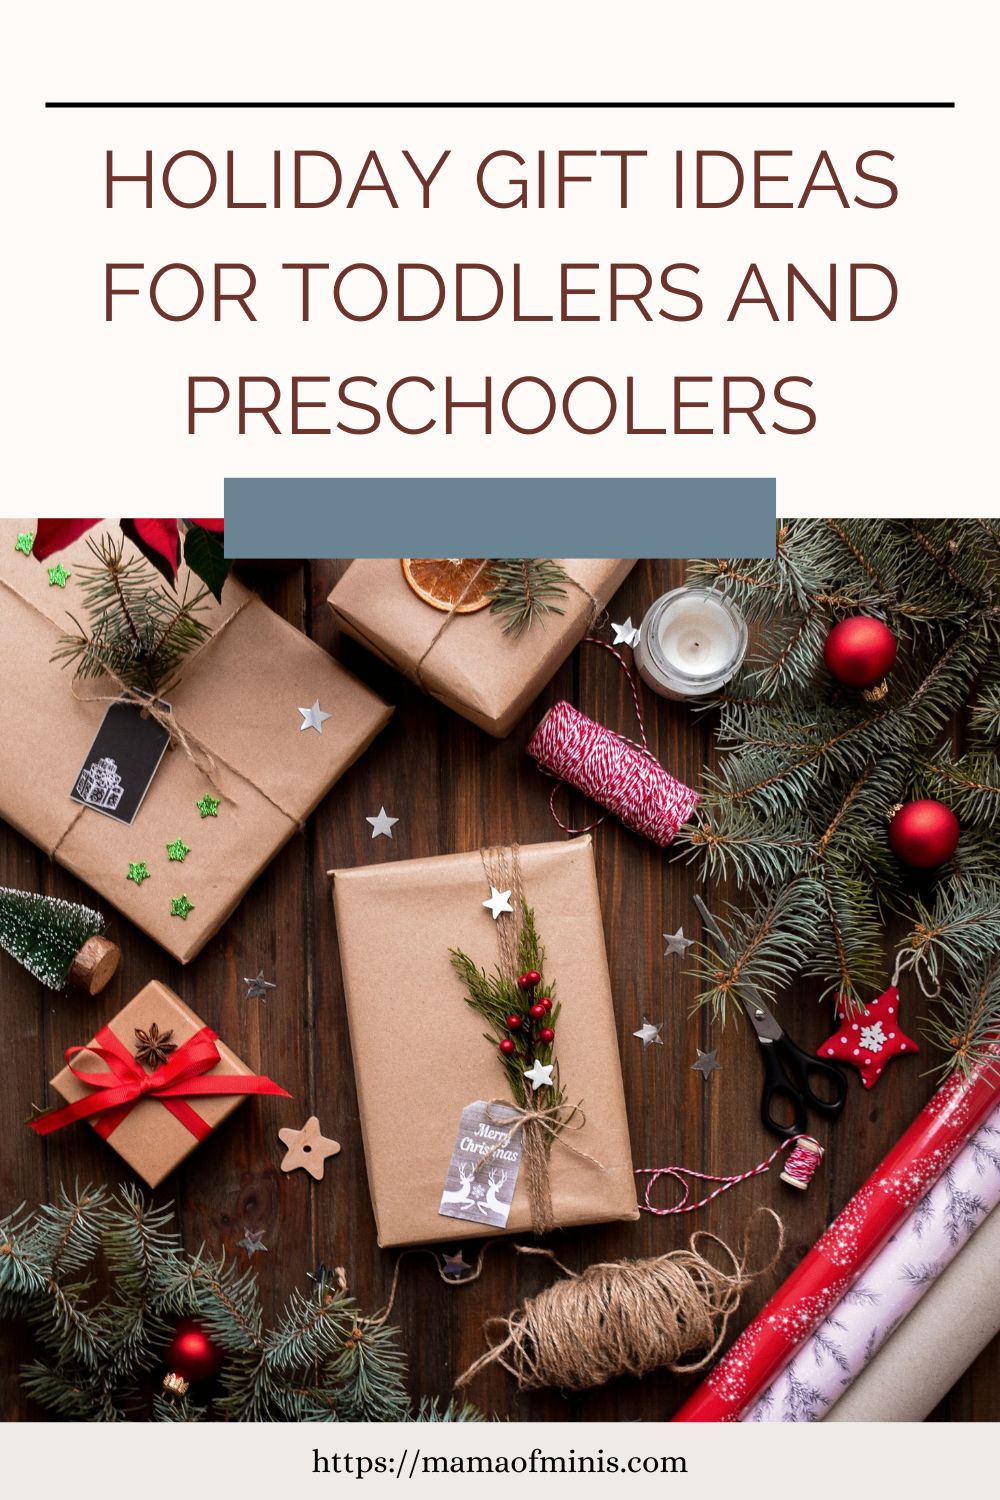 Holiday Gift Ideas for Toddlers and Preschoolers